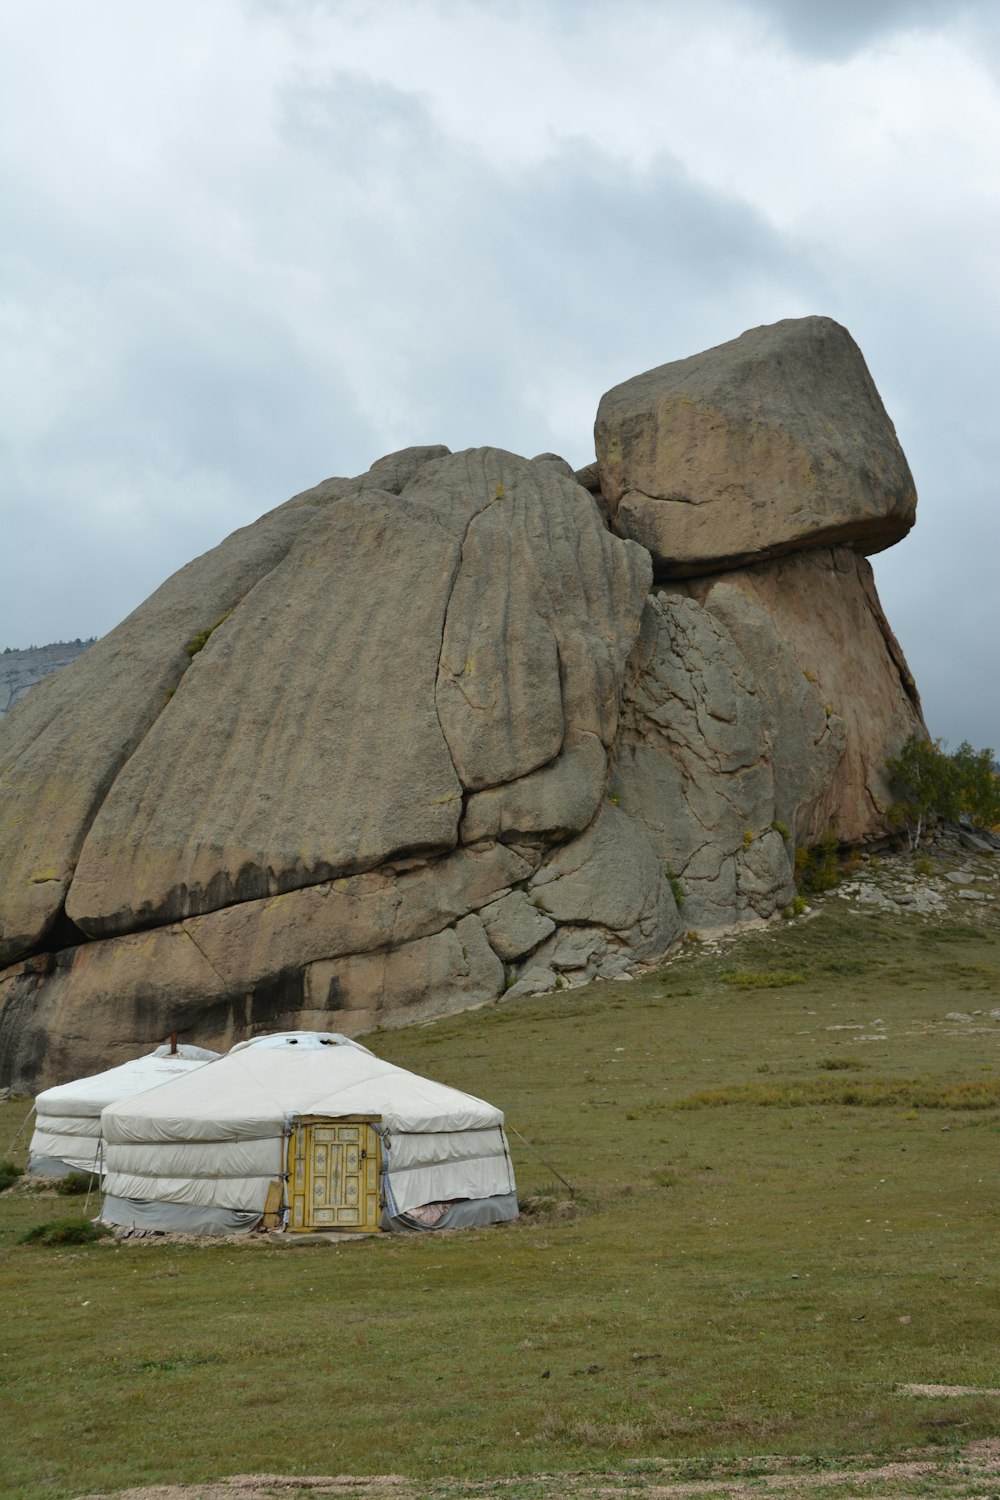 a large rock formation with a yurt in the foreground